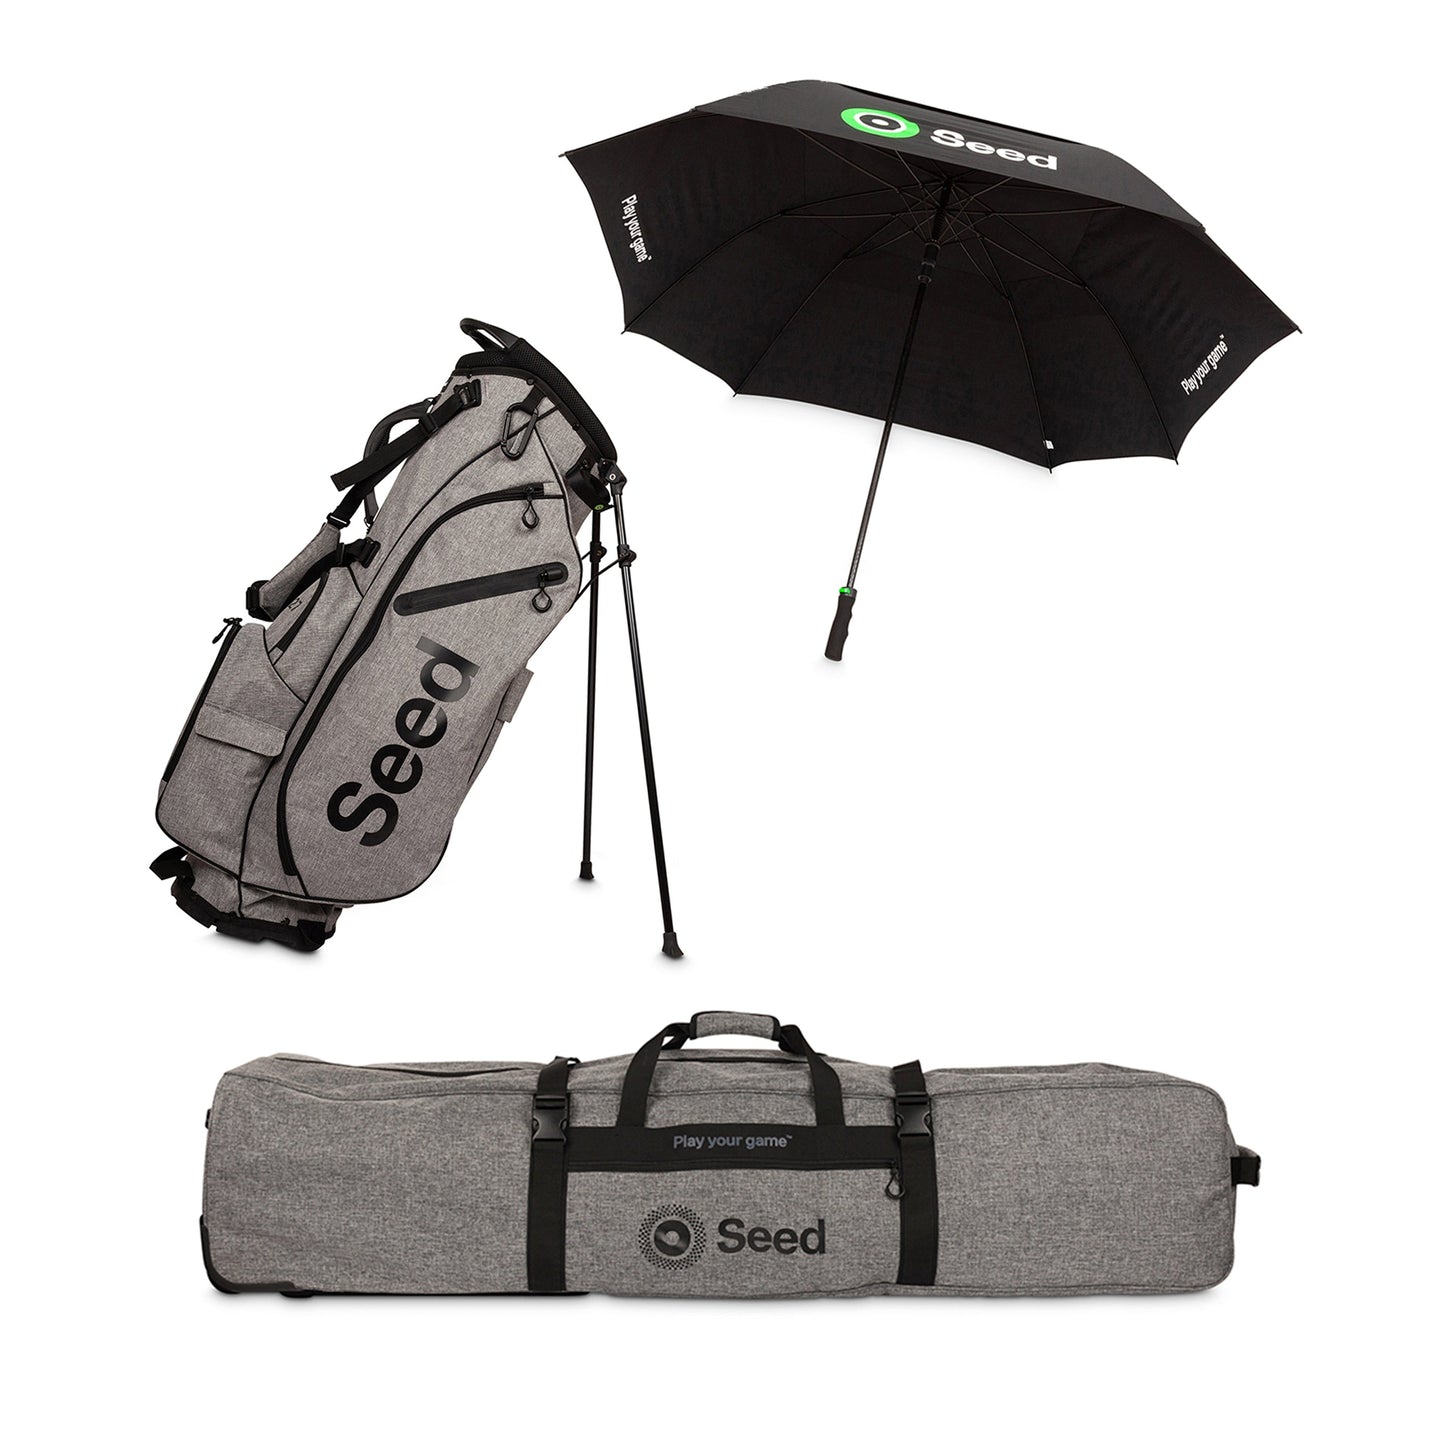 The Looper Stand, Jetset Travel Cover and Umbrella Bundle